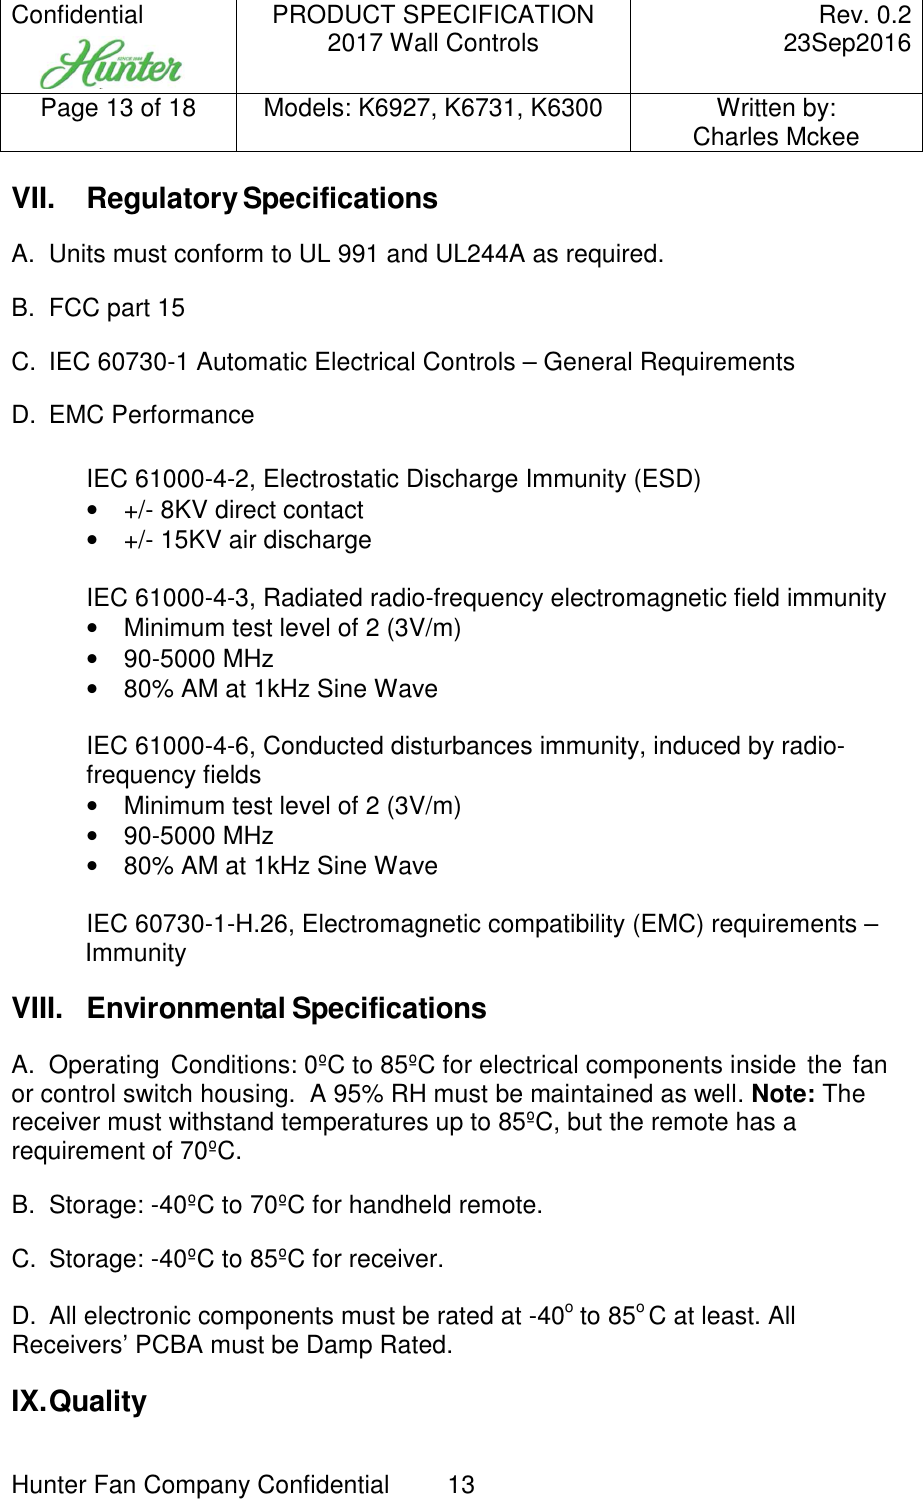 Confidential     PRODUCT SPECIFICATION 2017 Wall Controls  Rev. 0.2     23Sep2016 Page 13 of 18  Models: K6927, K6731, K6300  Written by: Charles Mckee  Hunter Fan Company Confidential  13   VII.  Regulatory Specifications  A.  Units must conform to UL 991 and UL244A as required. B.  FCC part 15 C.  IEC 60730-1 Automatic Electrical Controls – General Requirements D.  EMC Performance  IEC 61000-4-2, Electrostatic Discharge Immunity (ESD) •  +/- 8KV direct contact •  +/- 15KV air discharge  IEC 61000-4-3, Radiated radio-frequency electromagnetic field immunity •  Minimum test level of 2 (3V/m) •  90-5000 MHz •  80% AM at 1kHz Sine Wave  IEC 61000-4-6, Conducted disturbances immunity, induced by radio-frequency fields •  Minimum test level of 2 (3V/m) •  90-5000 MHz •  80% AM at 1kHz Sine Wave  IEC 60730-1-H.26, Electromagnetic compatibility (EMC) requirements – Immunity VIII.  Environmental Specifications A.  Operating  Conditions: 0ºC to 85ºC for electrical components inside  the fan or control switch housing.  A 95% RH must be maintained as well. Note: The receiver must withstand temperatures up to 85ºC, but the remote has a requirement of 70ºC.  B.  Storage: -40ºC to 70ºC for handheld remote. C.  Storage: -40ºC to 85ºC for receiver. D.  All electronic components must be rated at -40o to 85o C at least. All Receivers’ PCBA must be Damp Rated. IX. Quality 